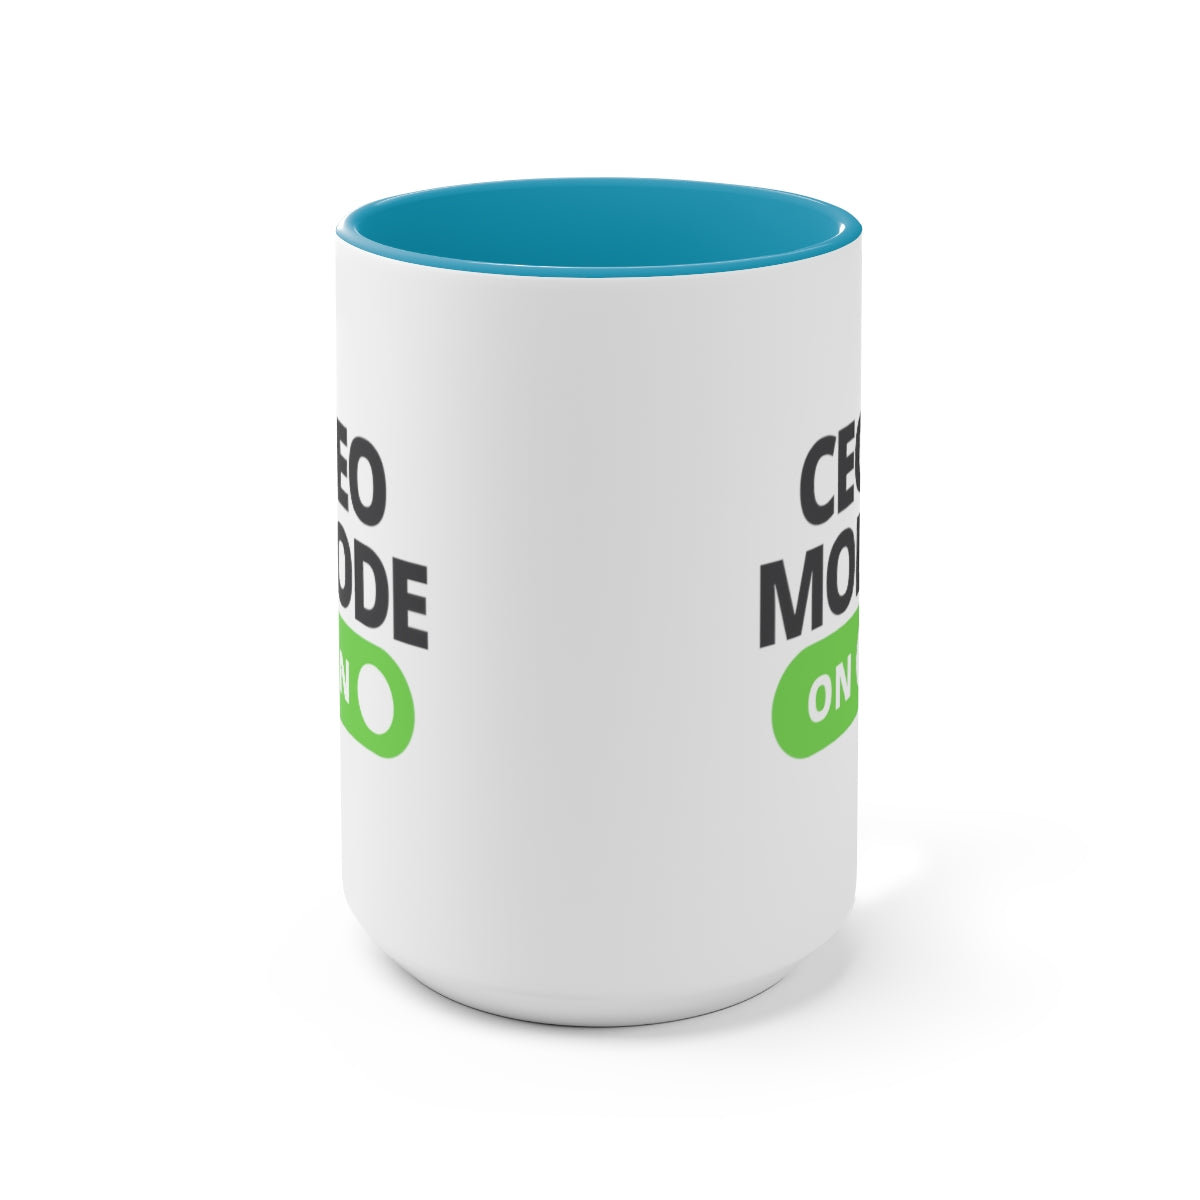 CEO Mode On Coffee Mug | Ceo Tea Mug | Mugs for the Boss | Gifts for Ceo |  Business Owner Gifts | Mugs Business Owner